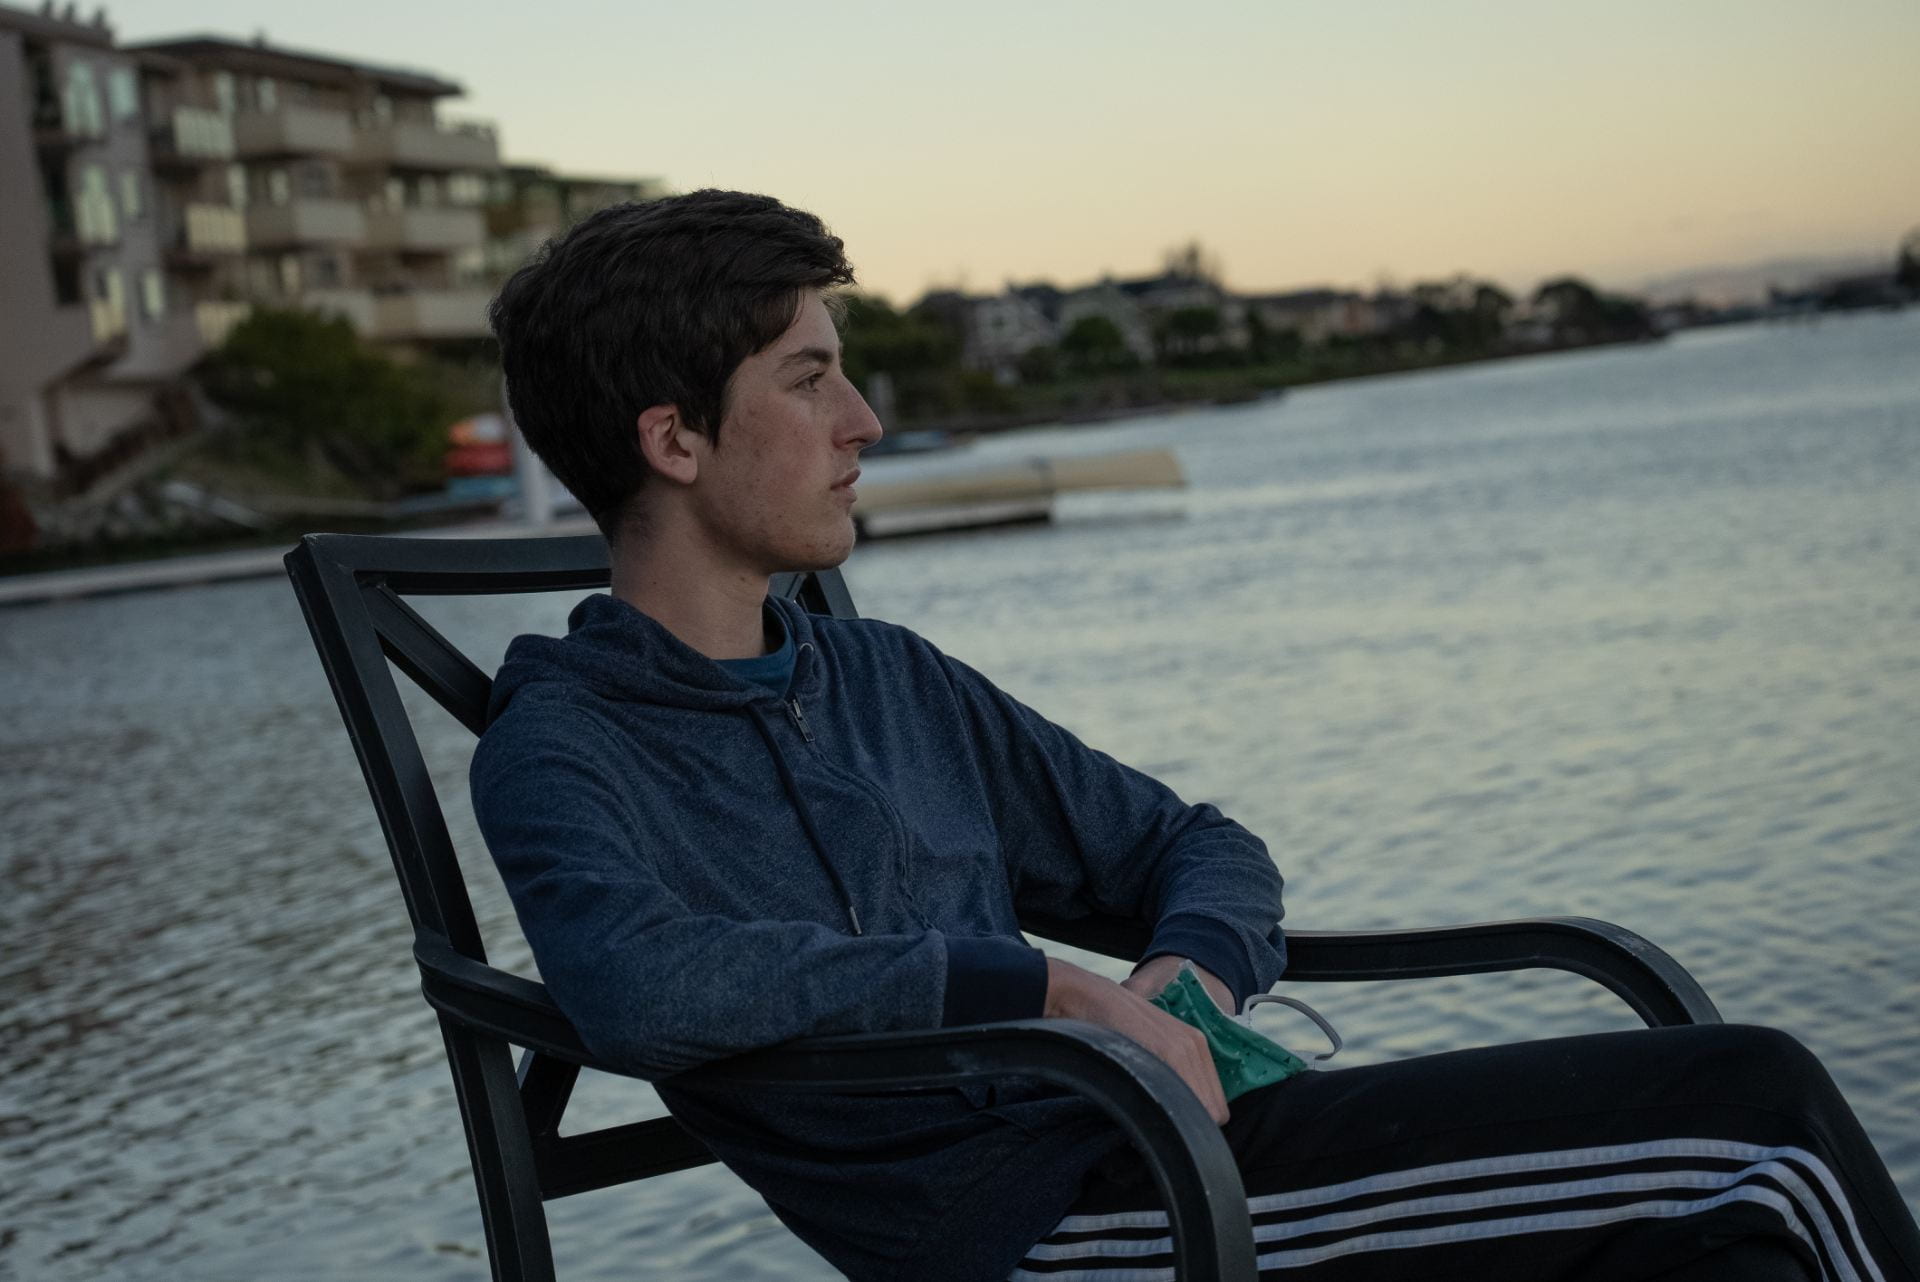 Jordan sits on the dock of the California creek he lives on, looking out over the water contemplatively.